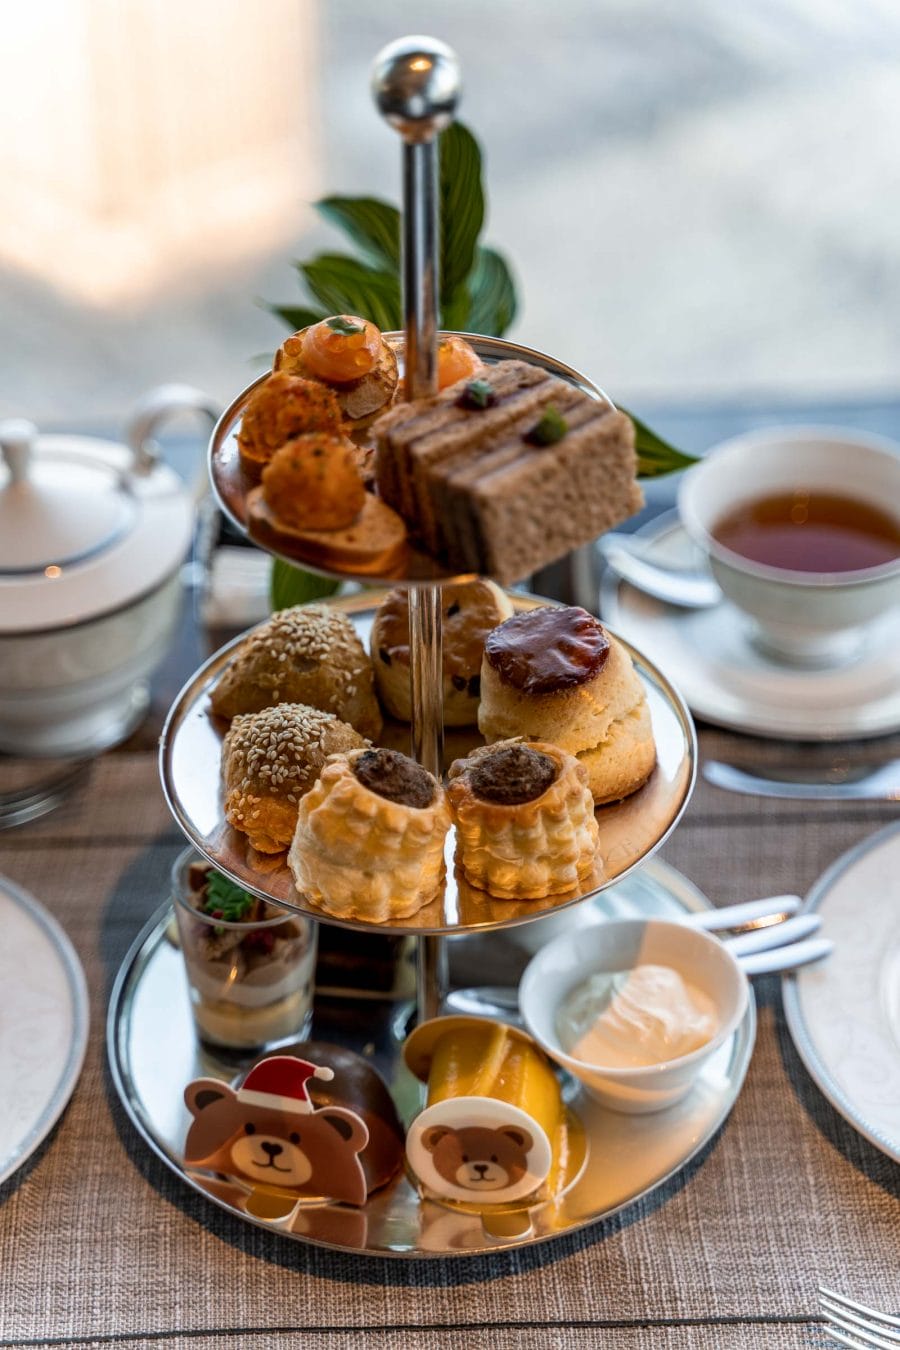 Afternoon tea with pastries and desserts